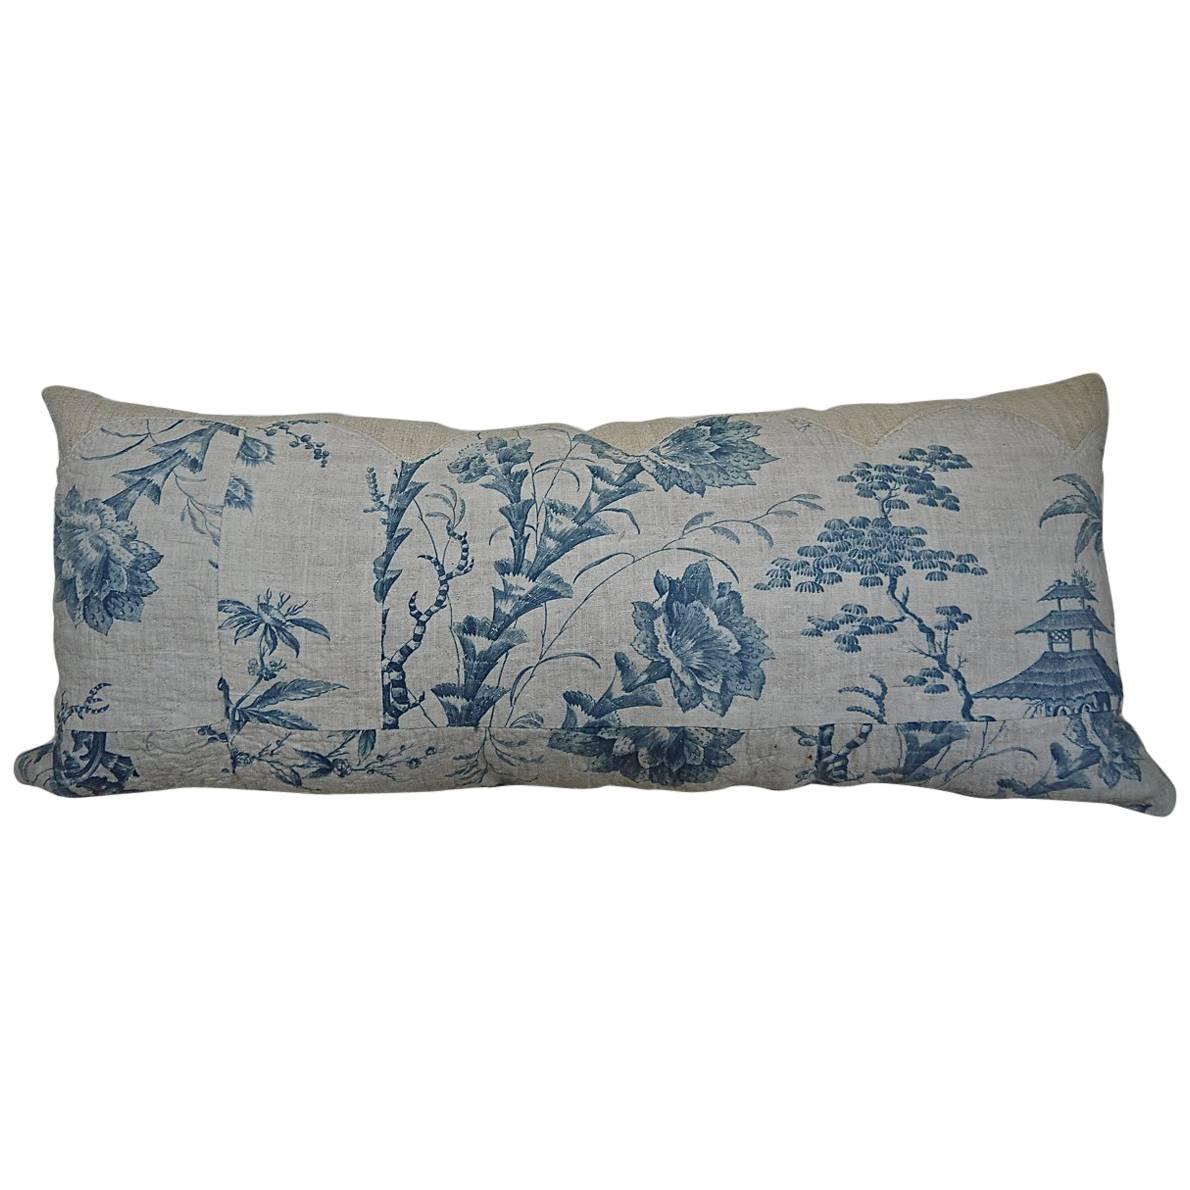  Chinoiserie Toile Blue and White pillow French 18th century